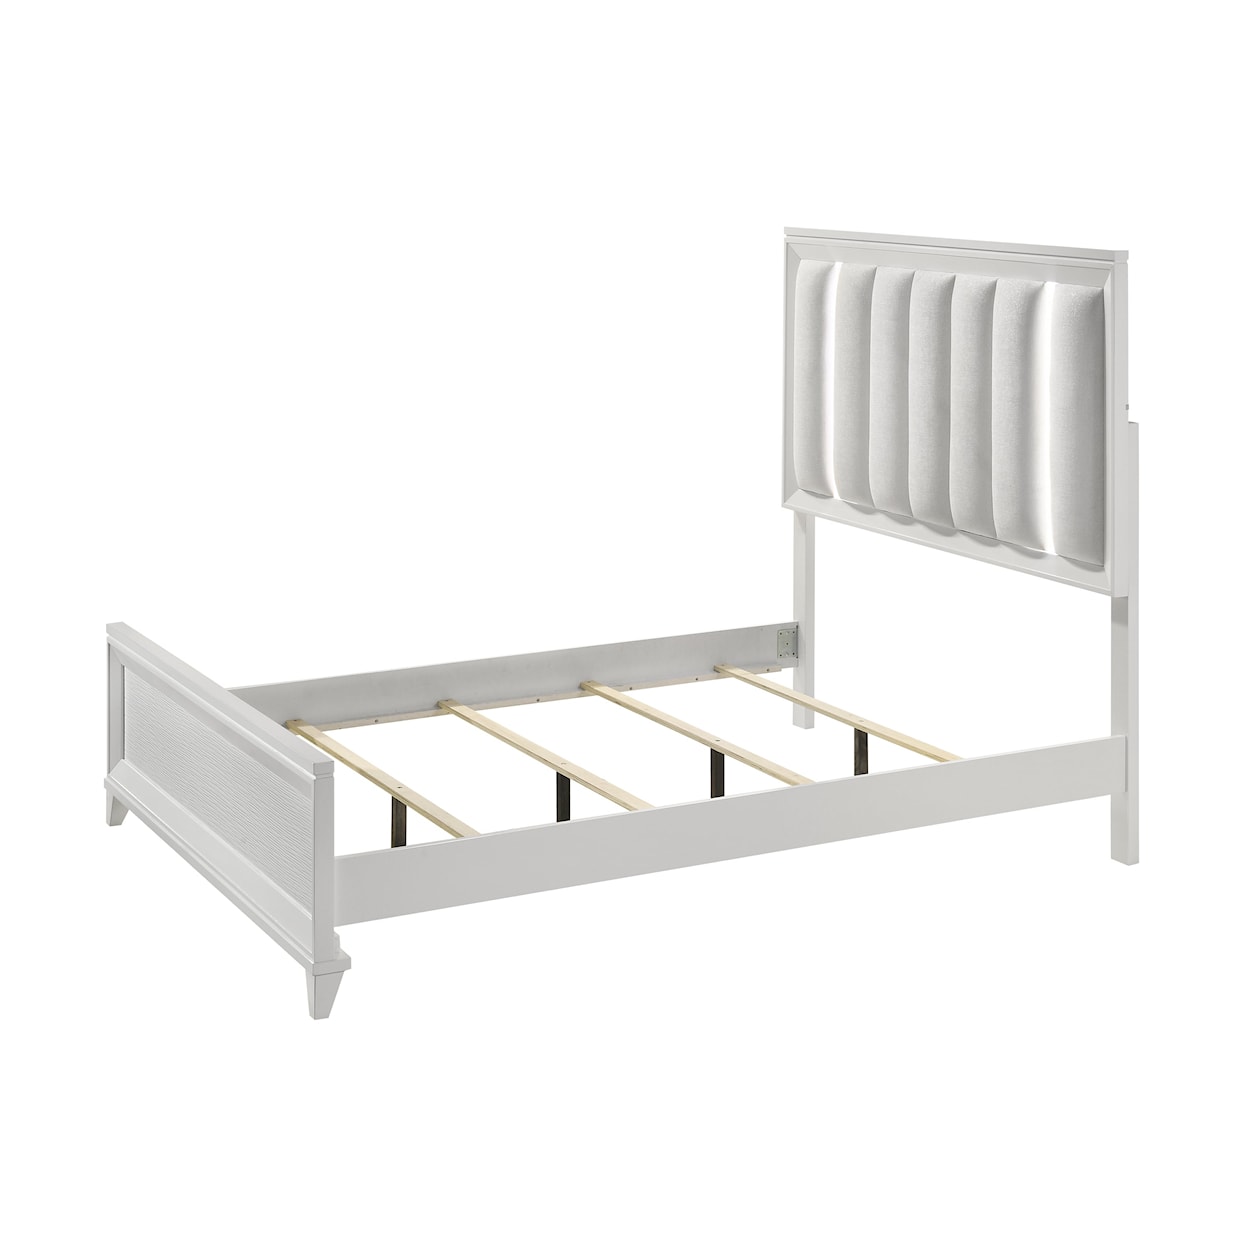 Crown Mark CRESSIDA CRESCENT WHITE LED QUEEN BED |